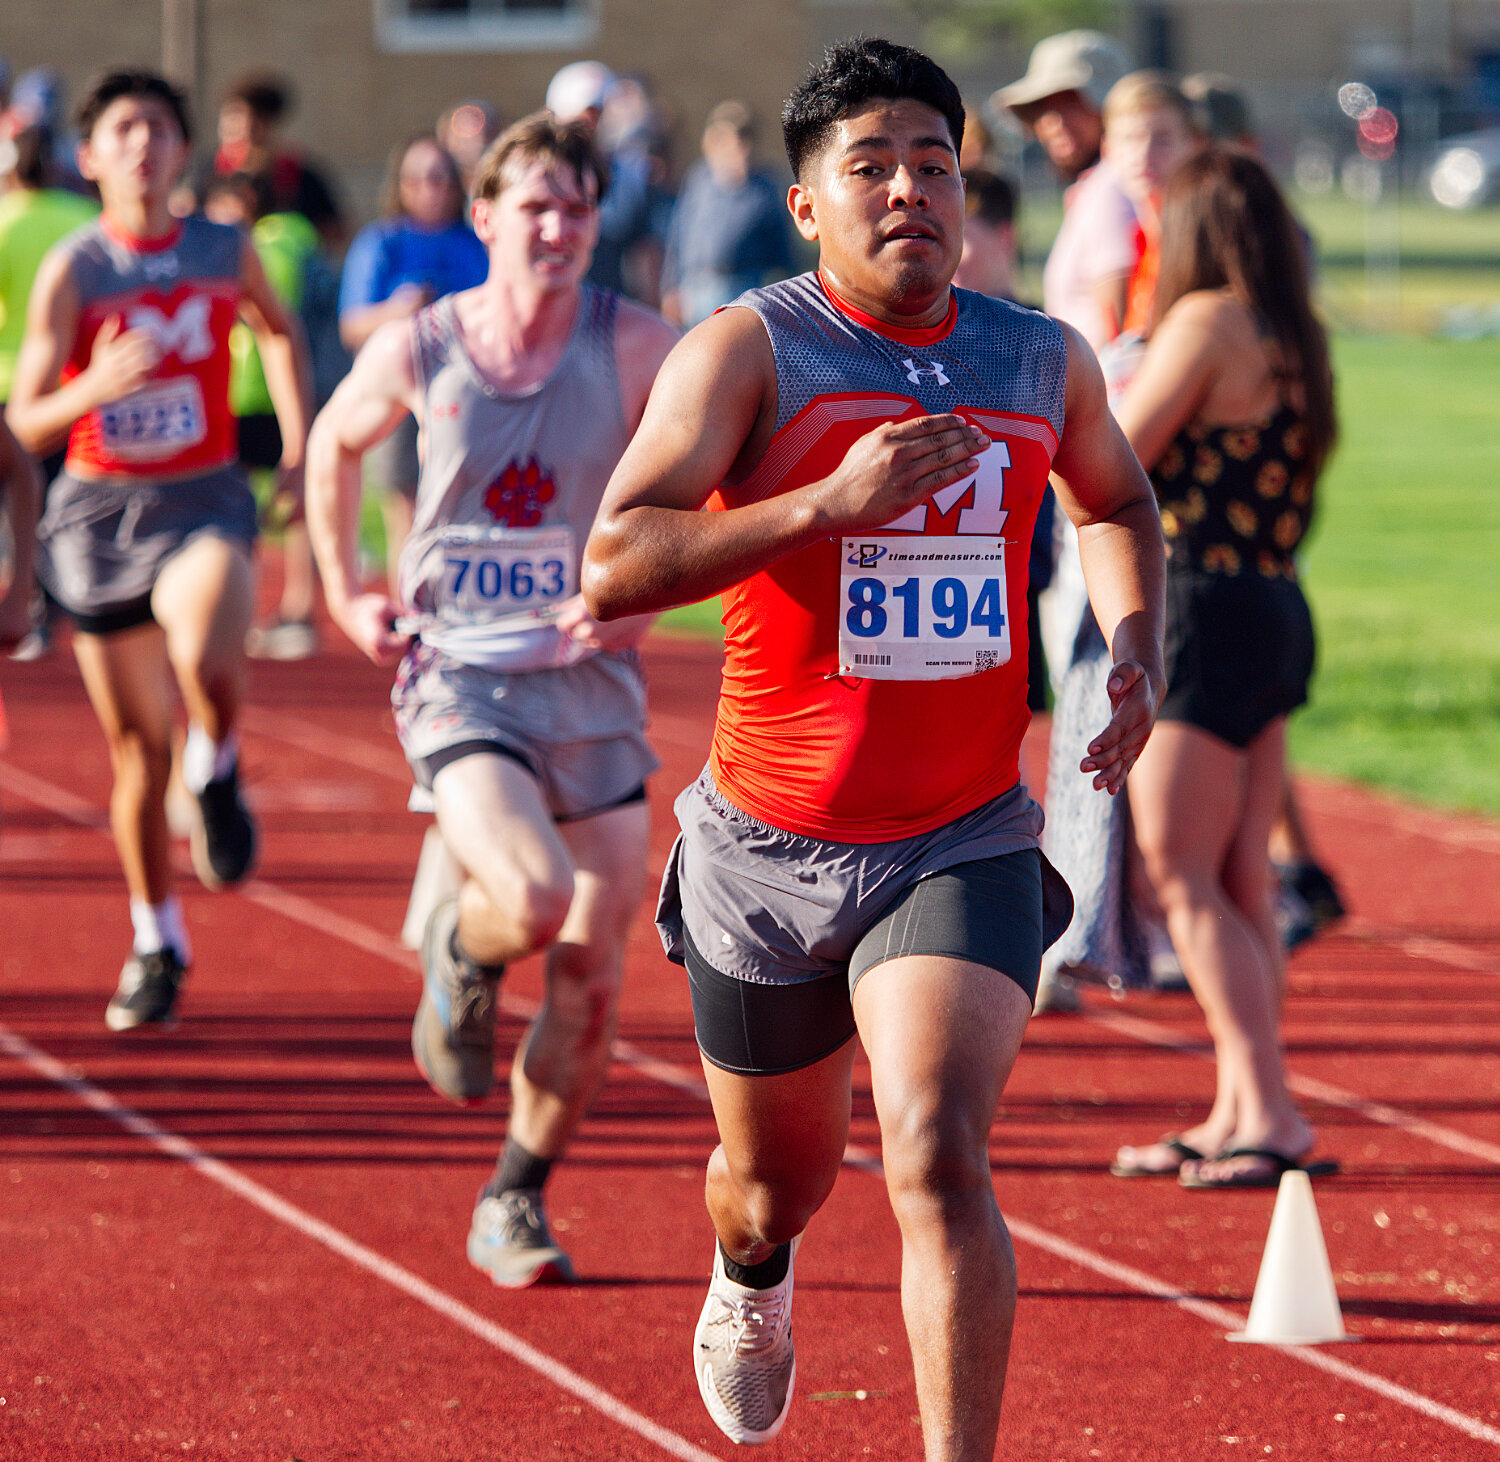 Mineola's Kaleb Silvereo approaches the finish line, followed closely by teammate Sebastian Klodnicki and Alba-Golden's Hudson Wright. [catch the cross-country competition]